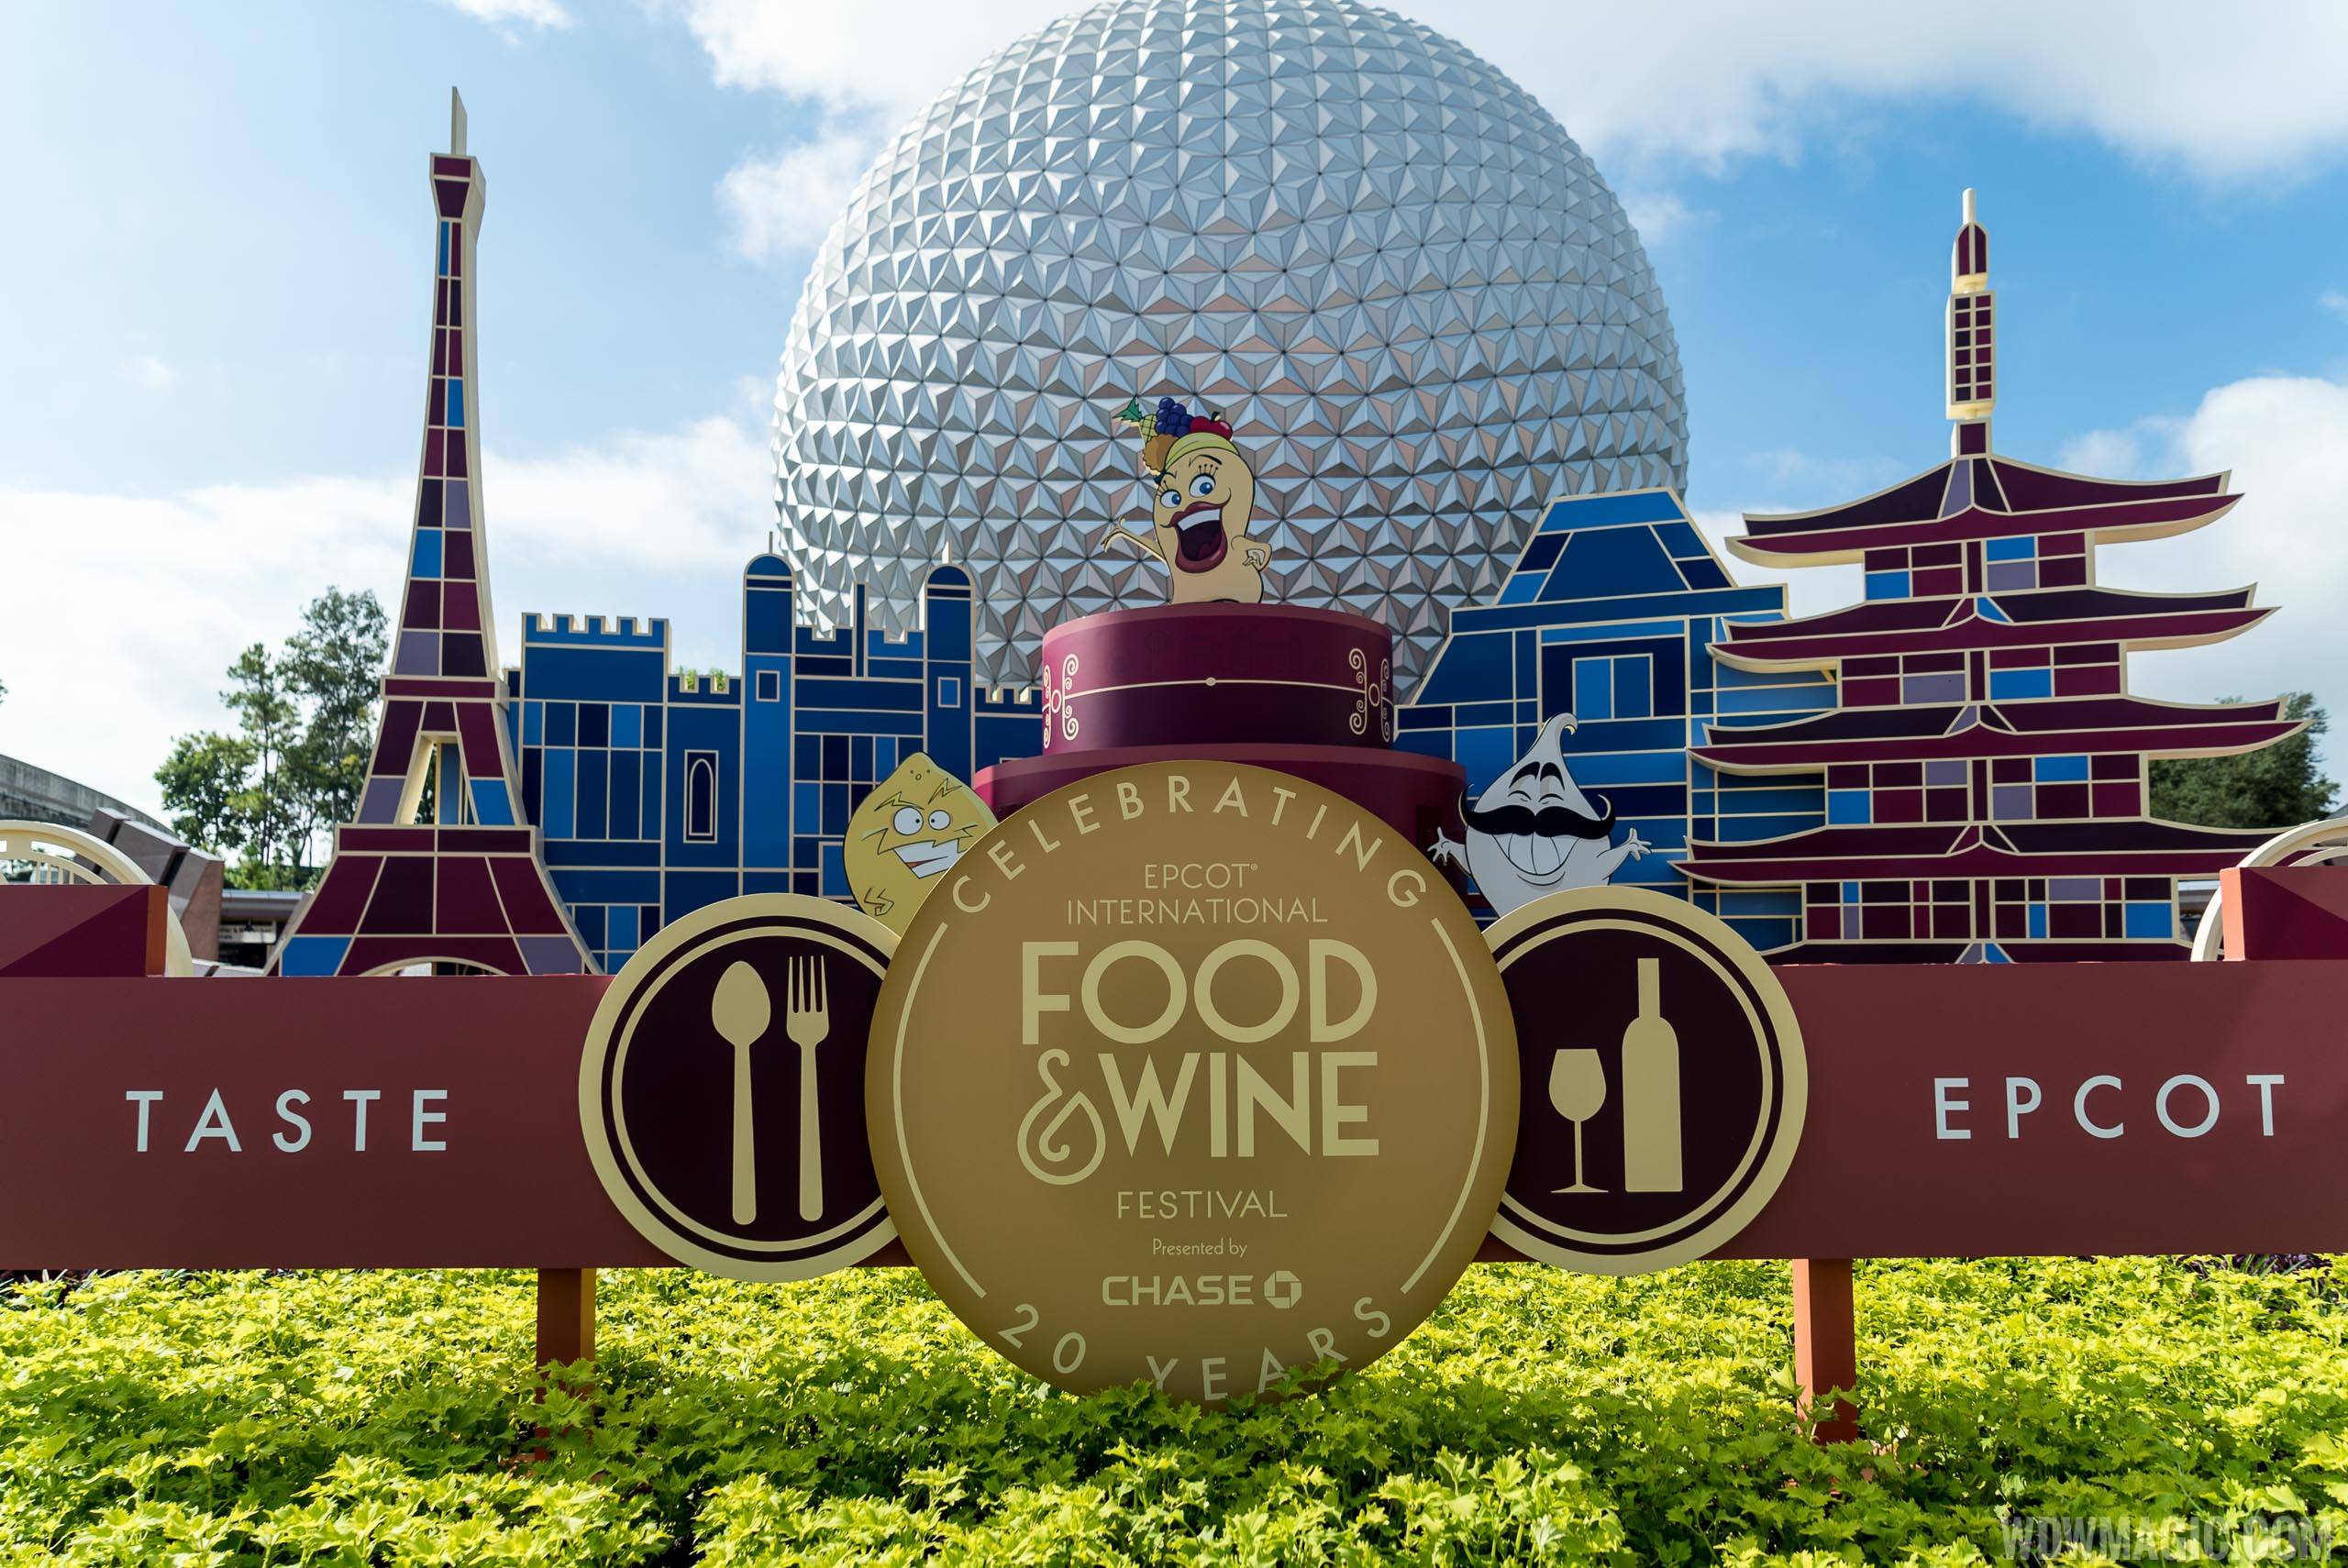 Epcot Food and Wine Festival overview